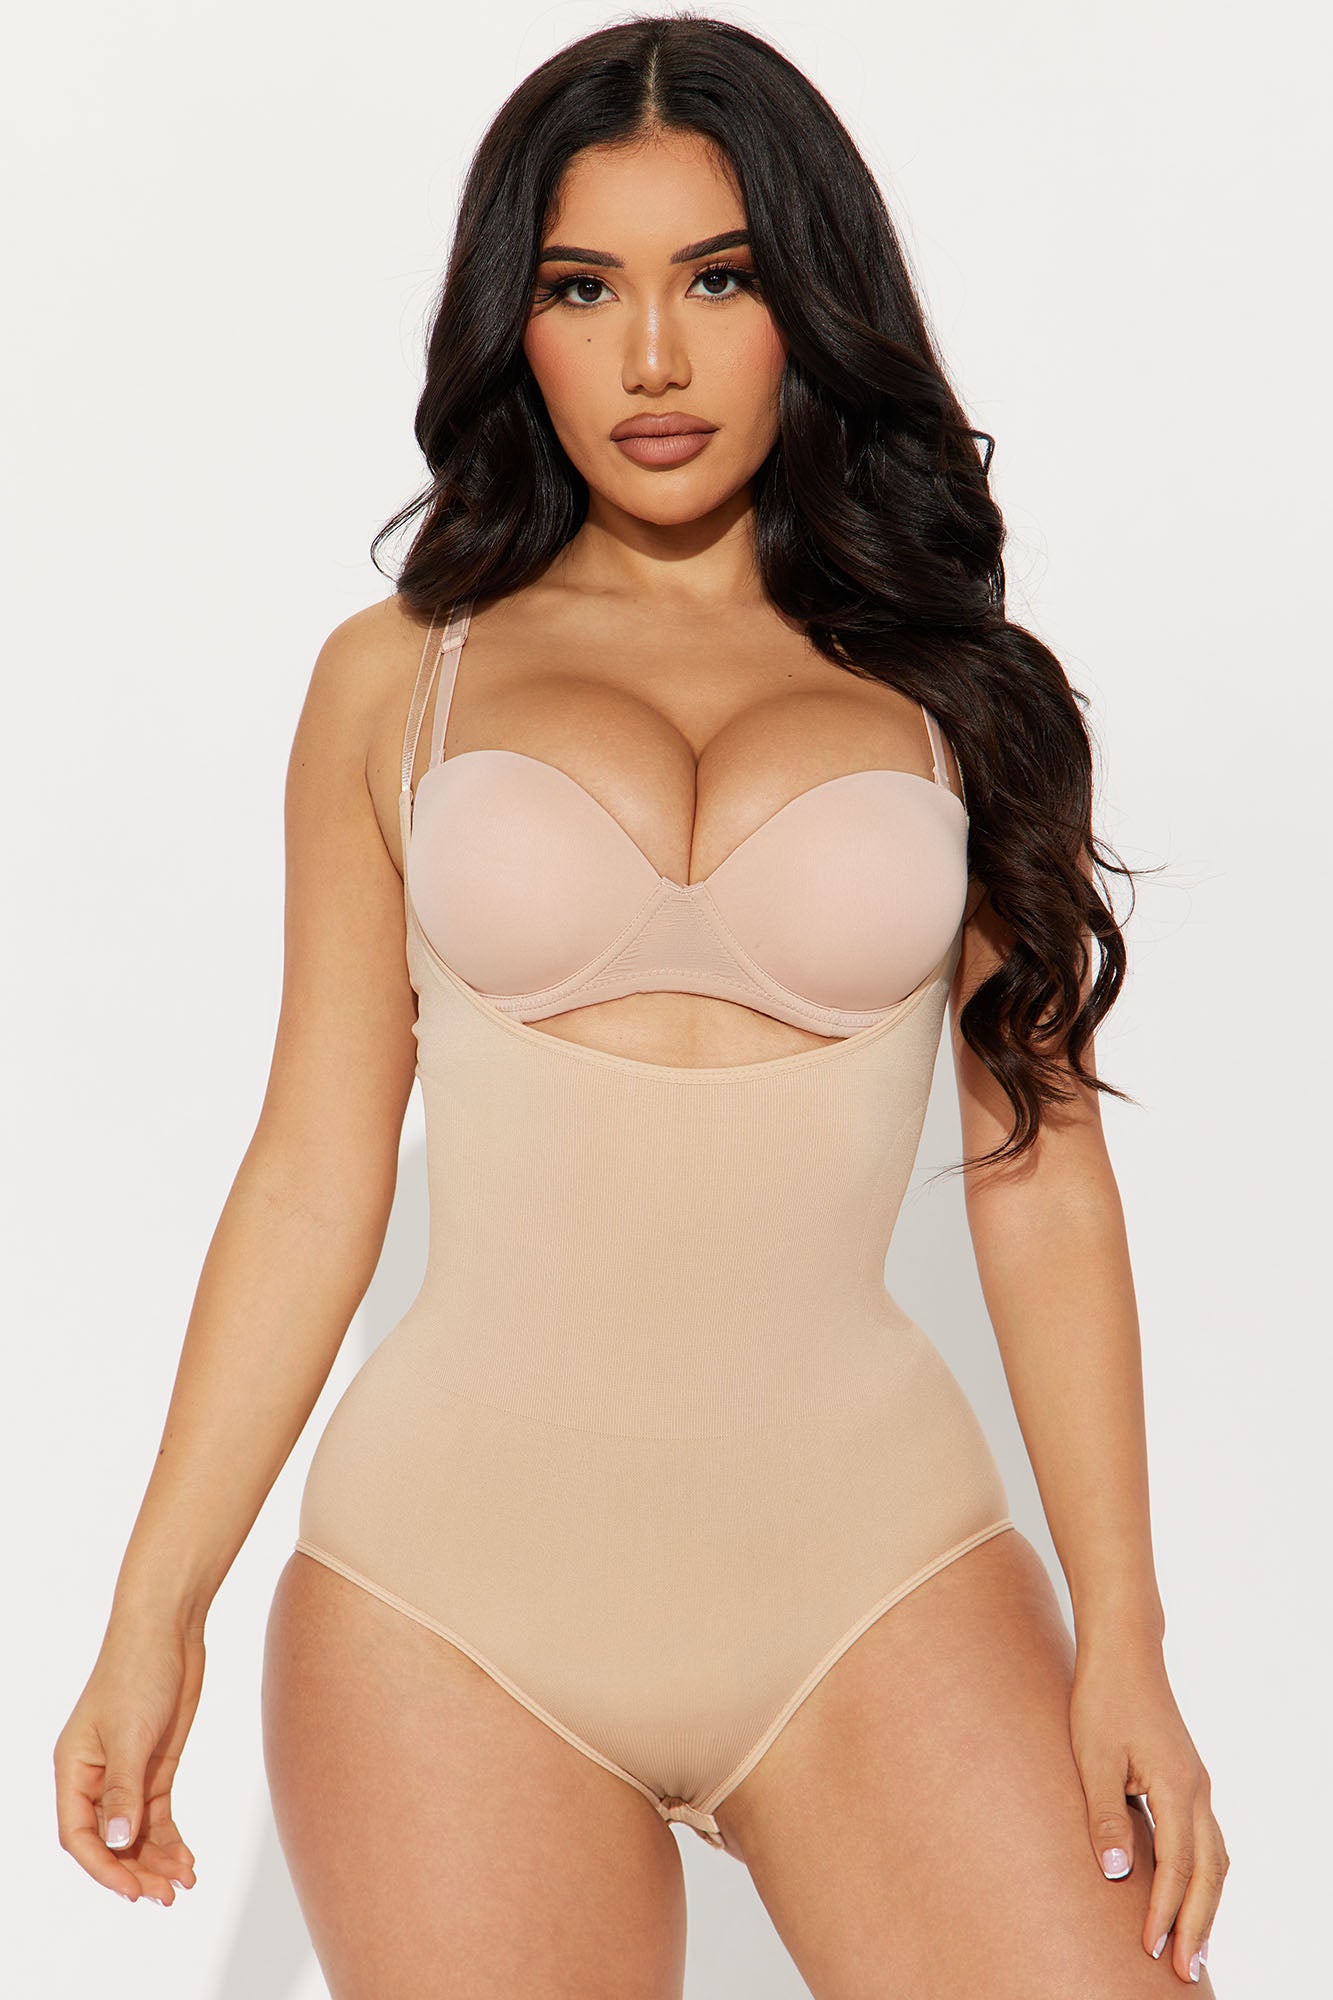 Buy Heavenly Shapewear Women's Molded Cup Printed Bodysuit, Nude, Large at